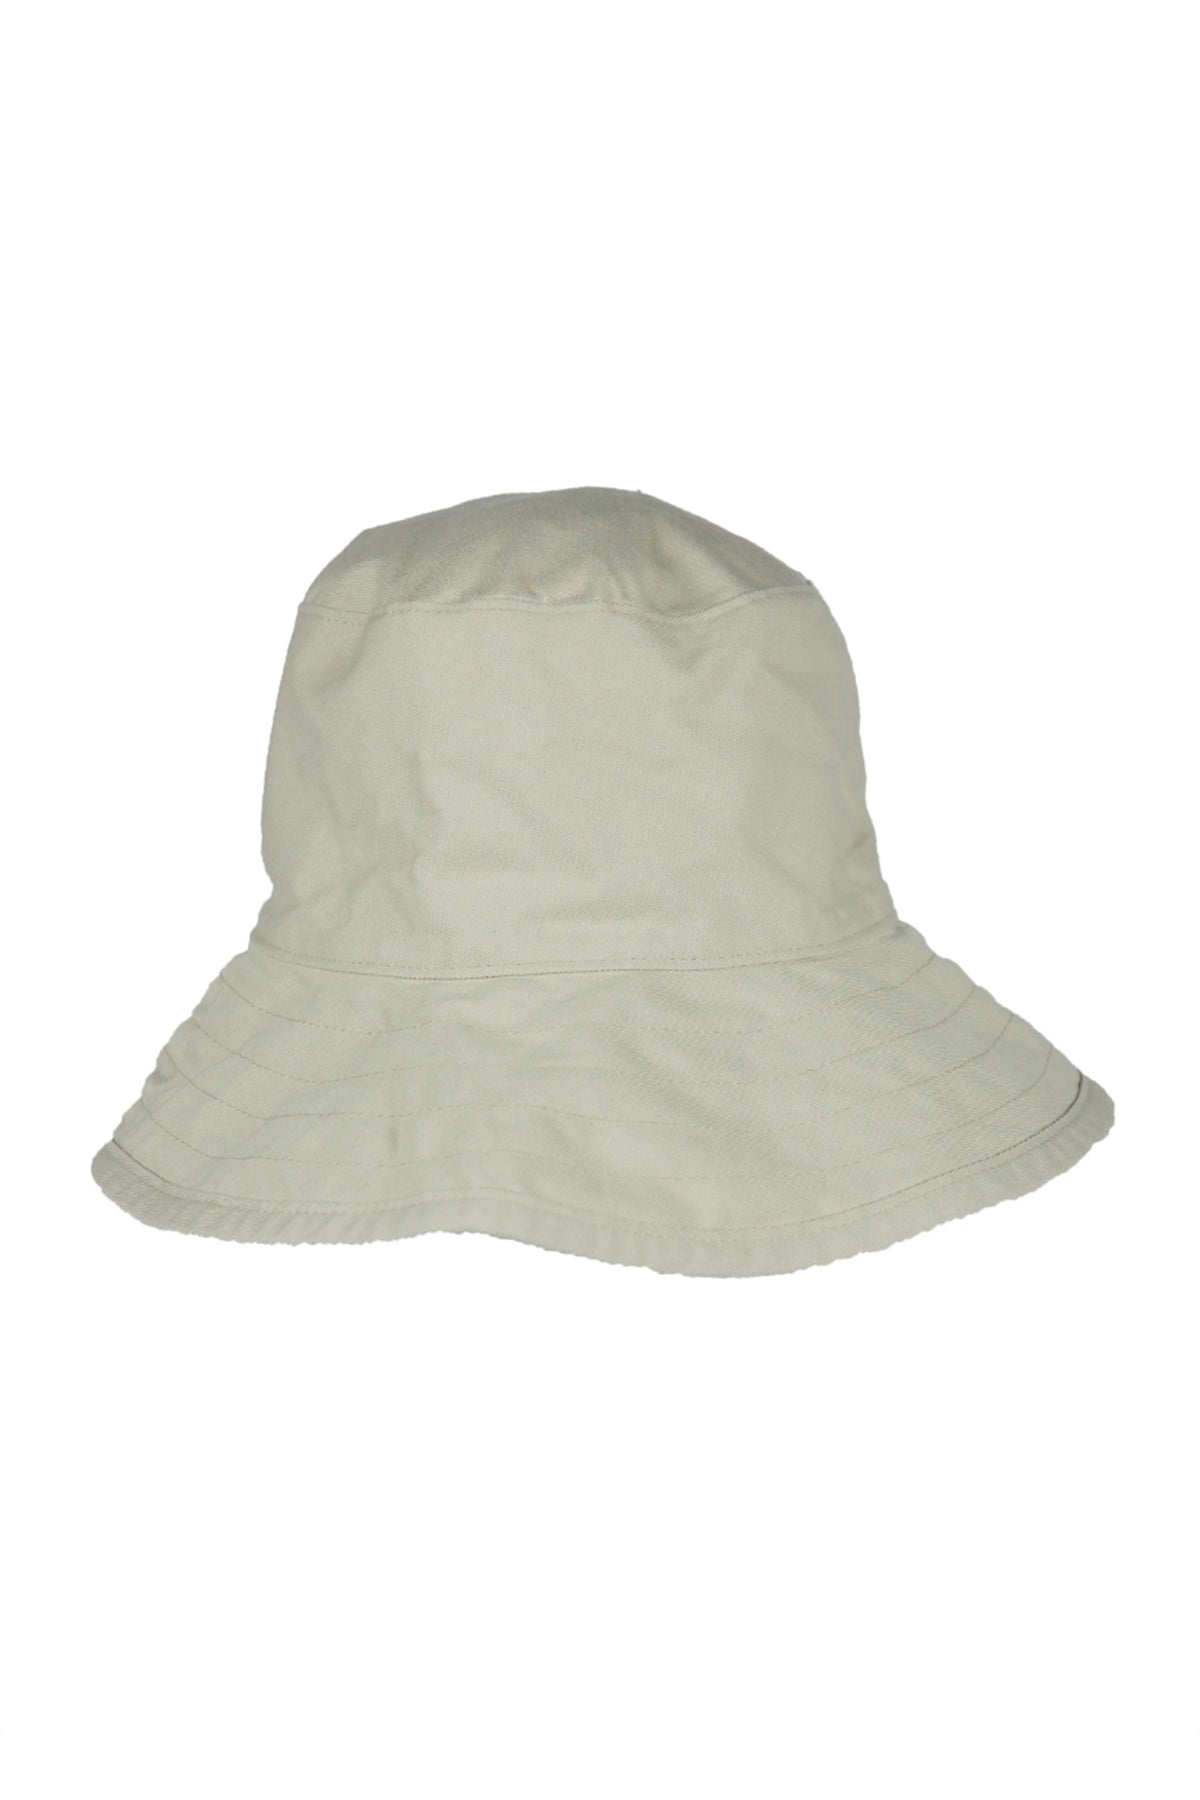 a WASHED COTTON CRUSHER HAT by Velvet by Graham & Spencer on a white background.-26166719119553